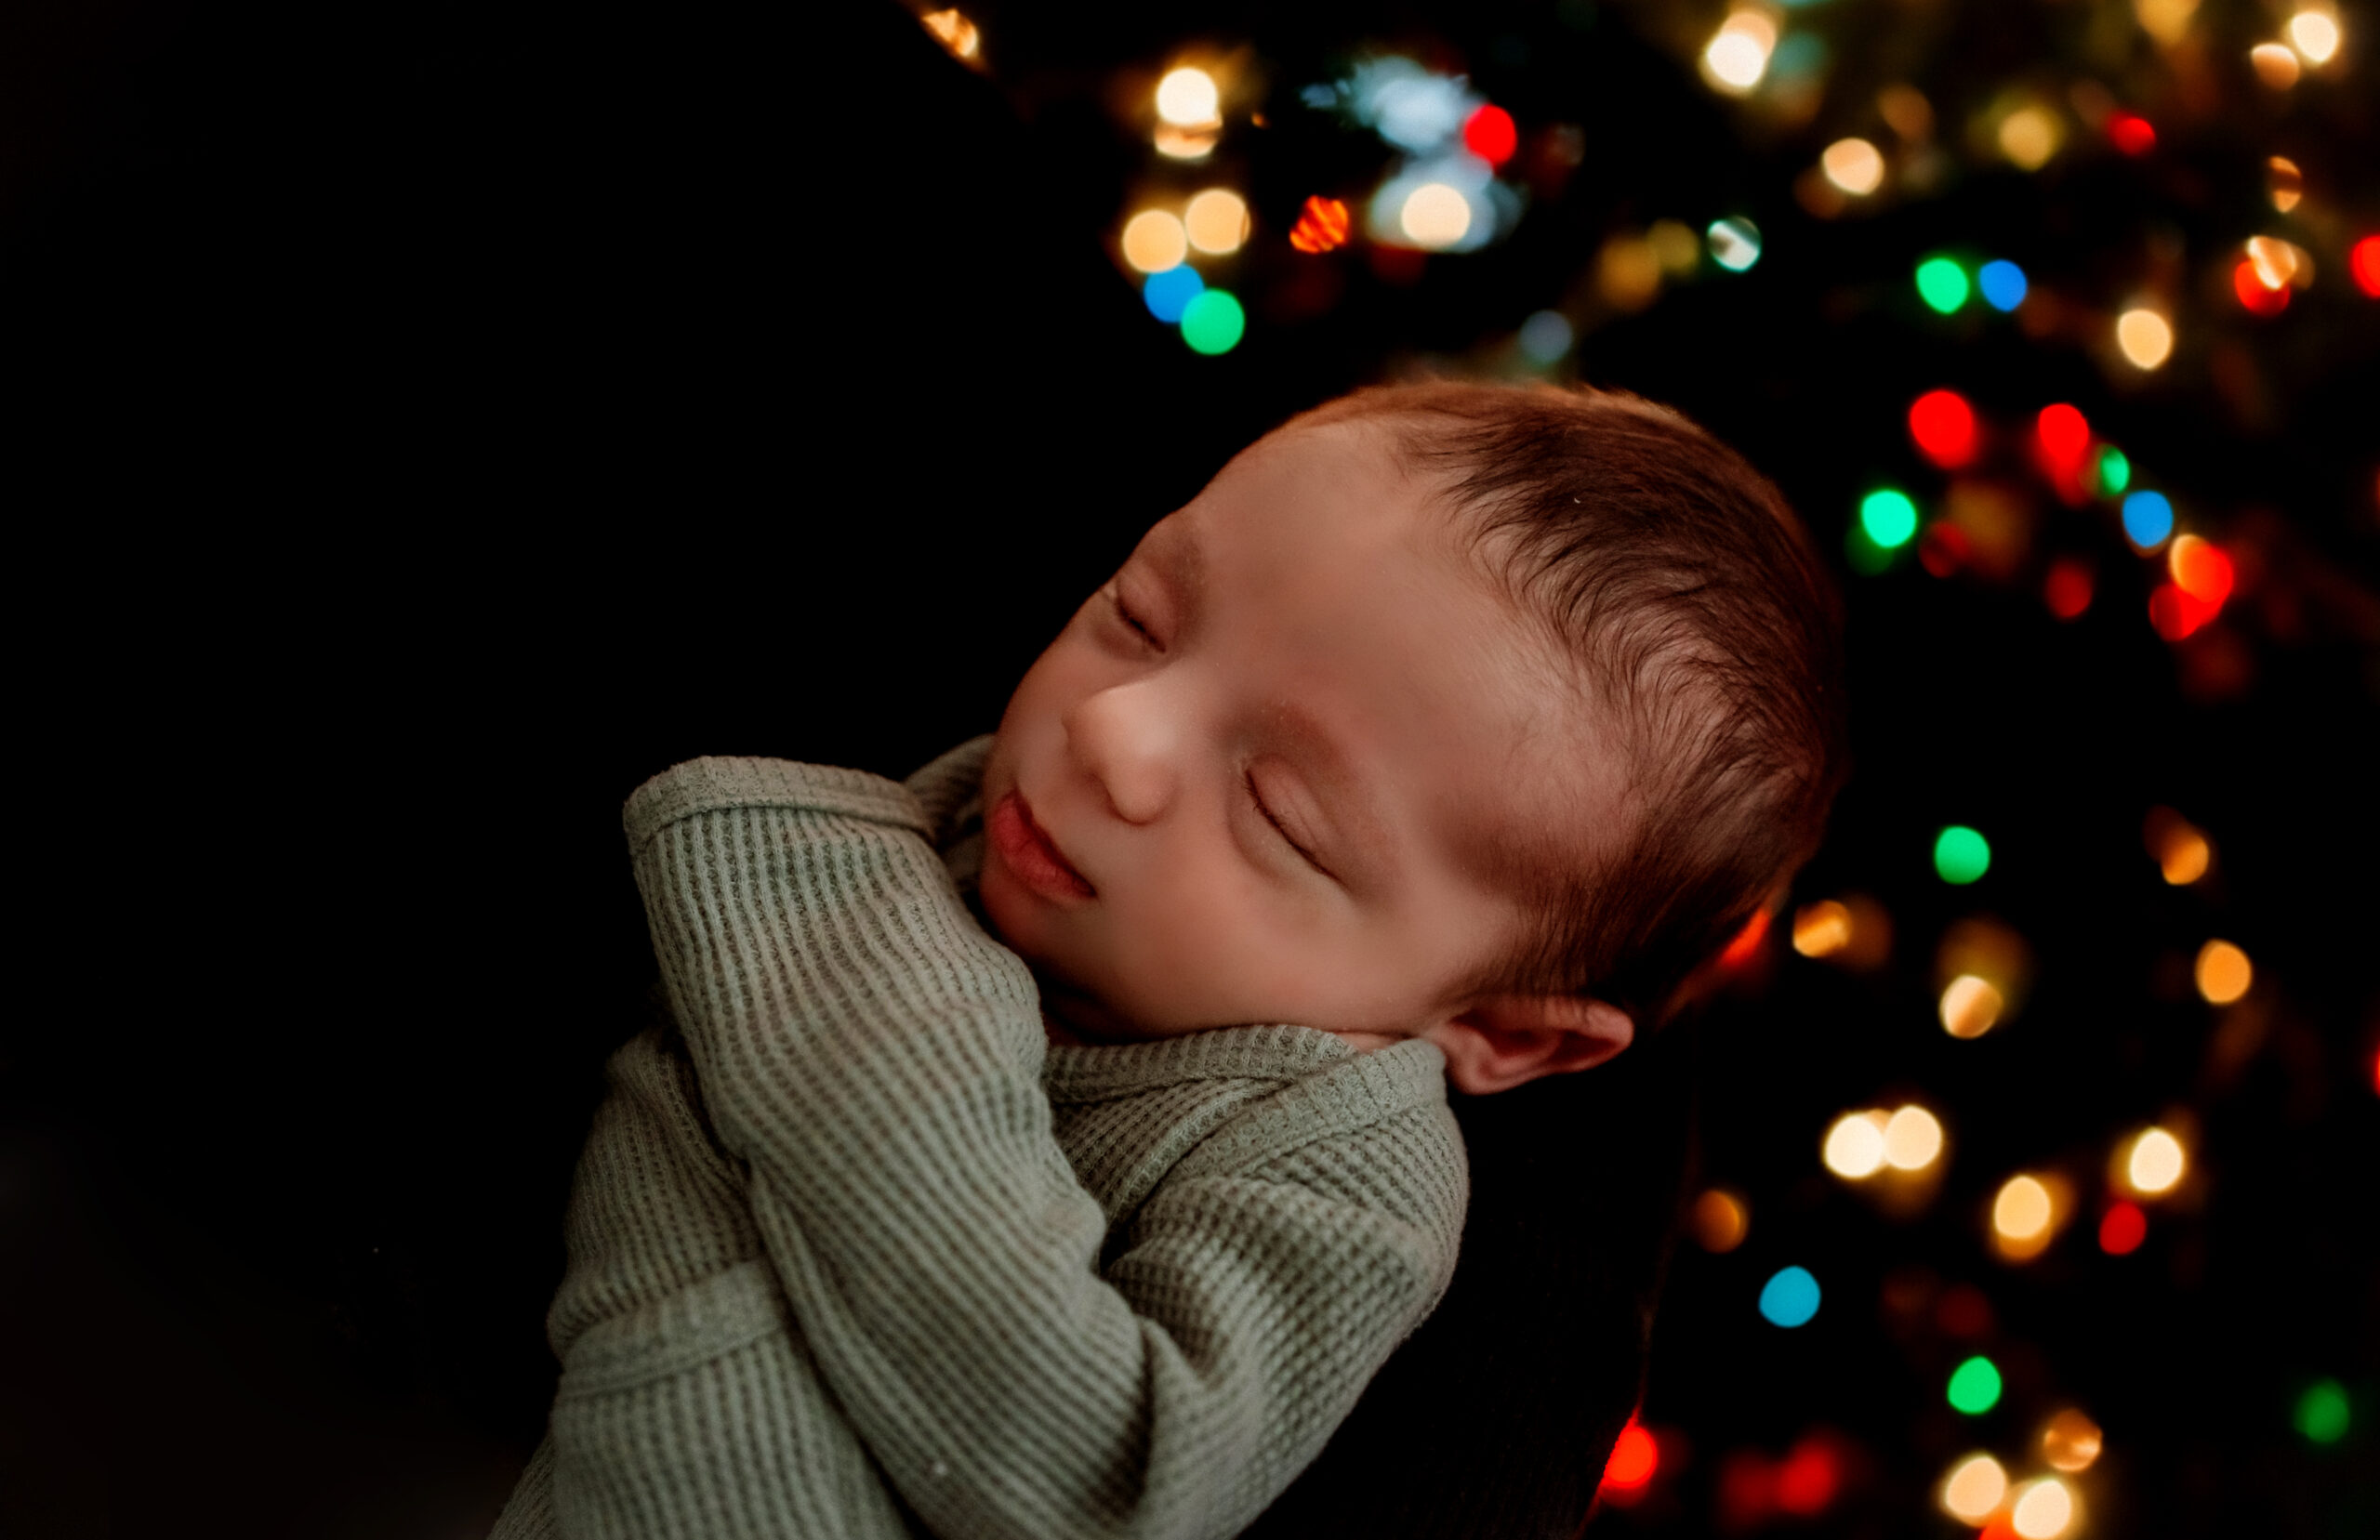 Newborn baby sleeps comfortably in his mother's arms as they pose in front of the glistening lights of the Christmas Tree.